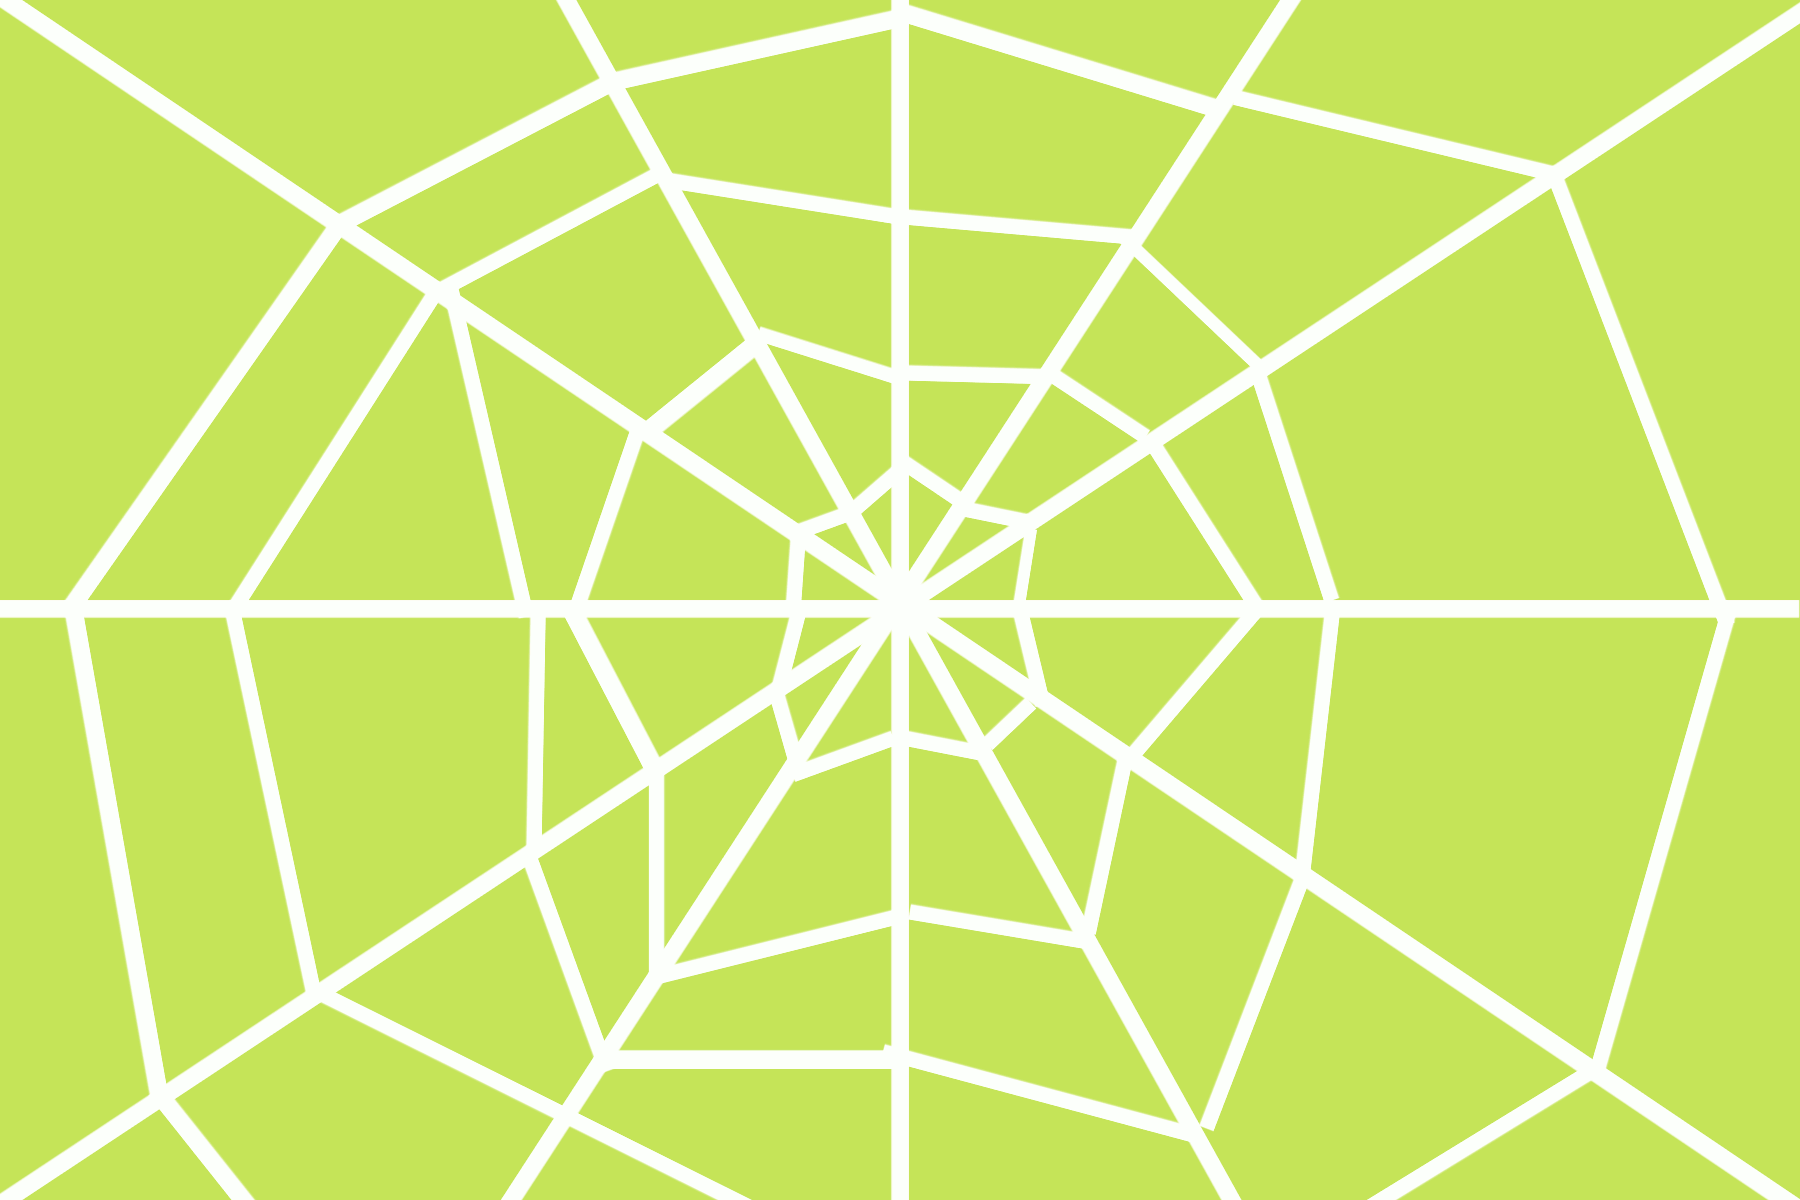 This gif displays the ecology as a spiderweb, and features pop up that represent the systems of interpersonal interaction, ideas, purposes, and materials. In the center, it says 'composing' to illustrate the influence of all the ecological elements on the writing or content creation process